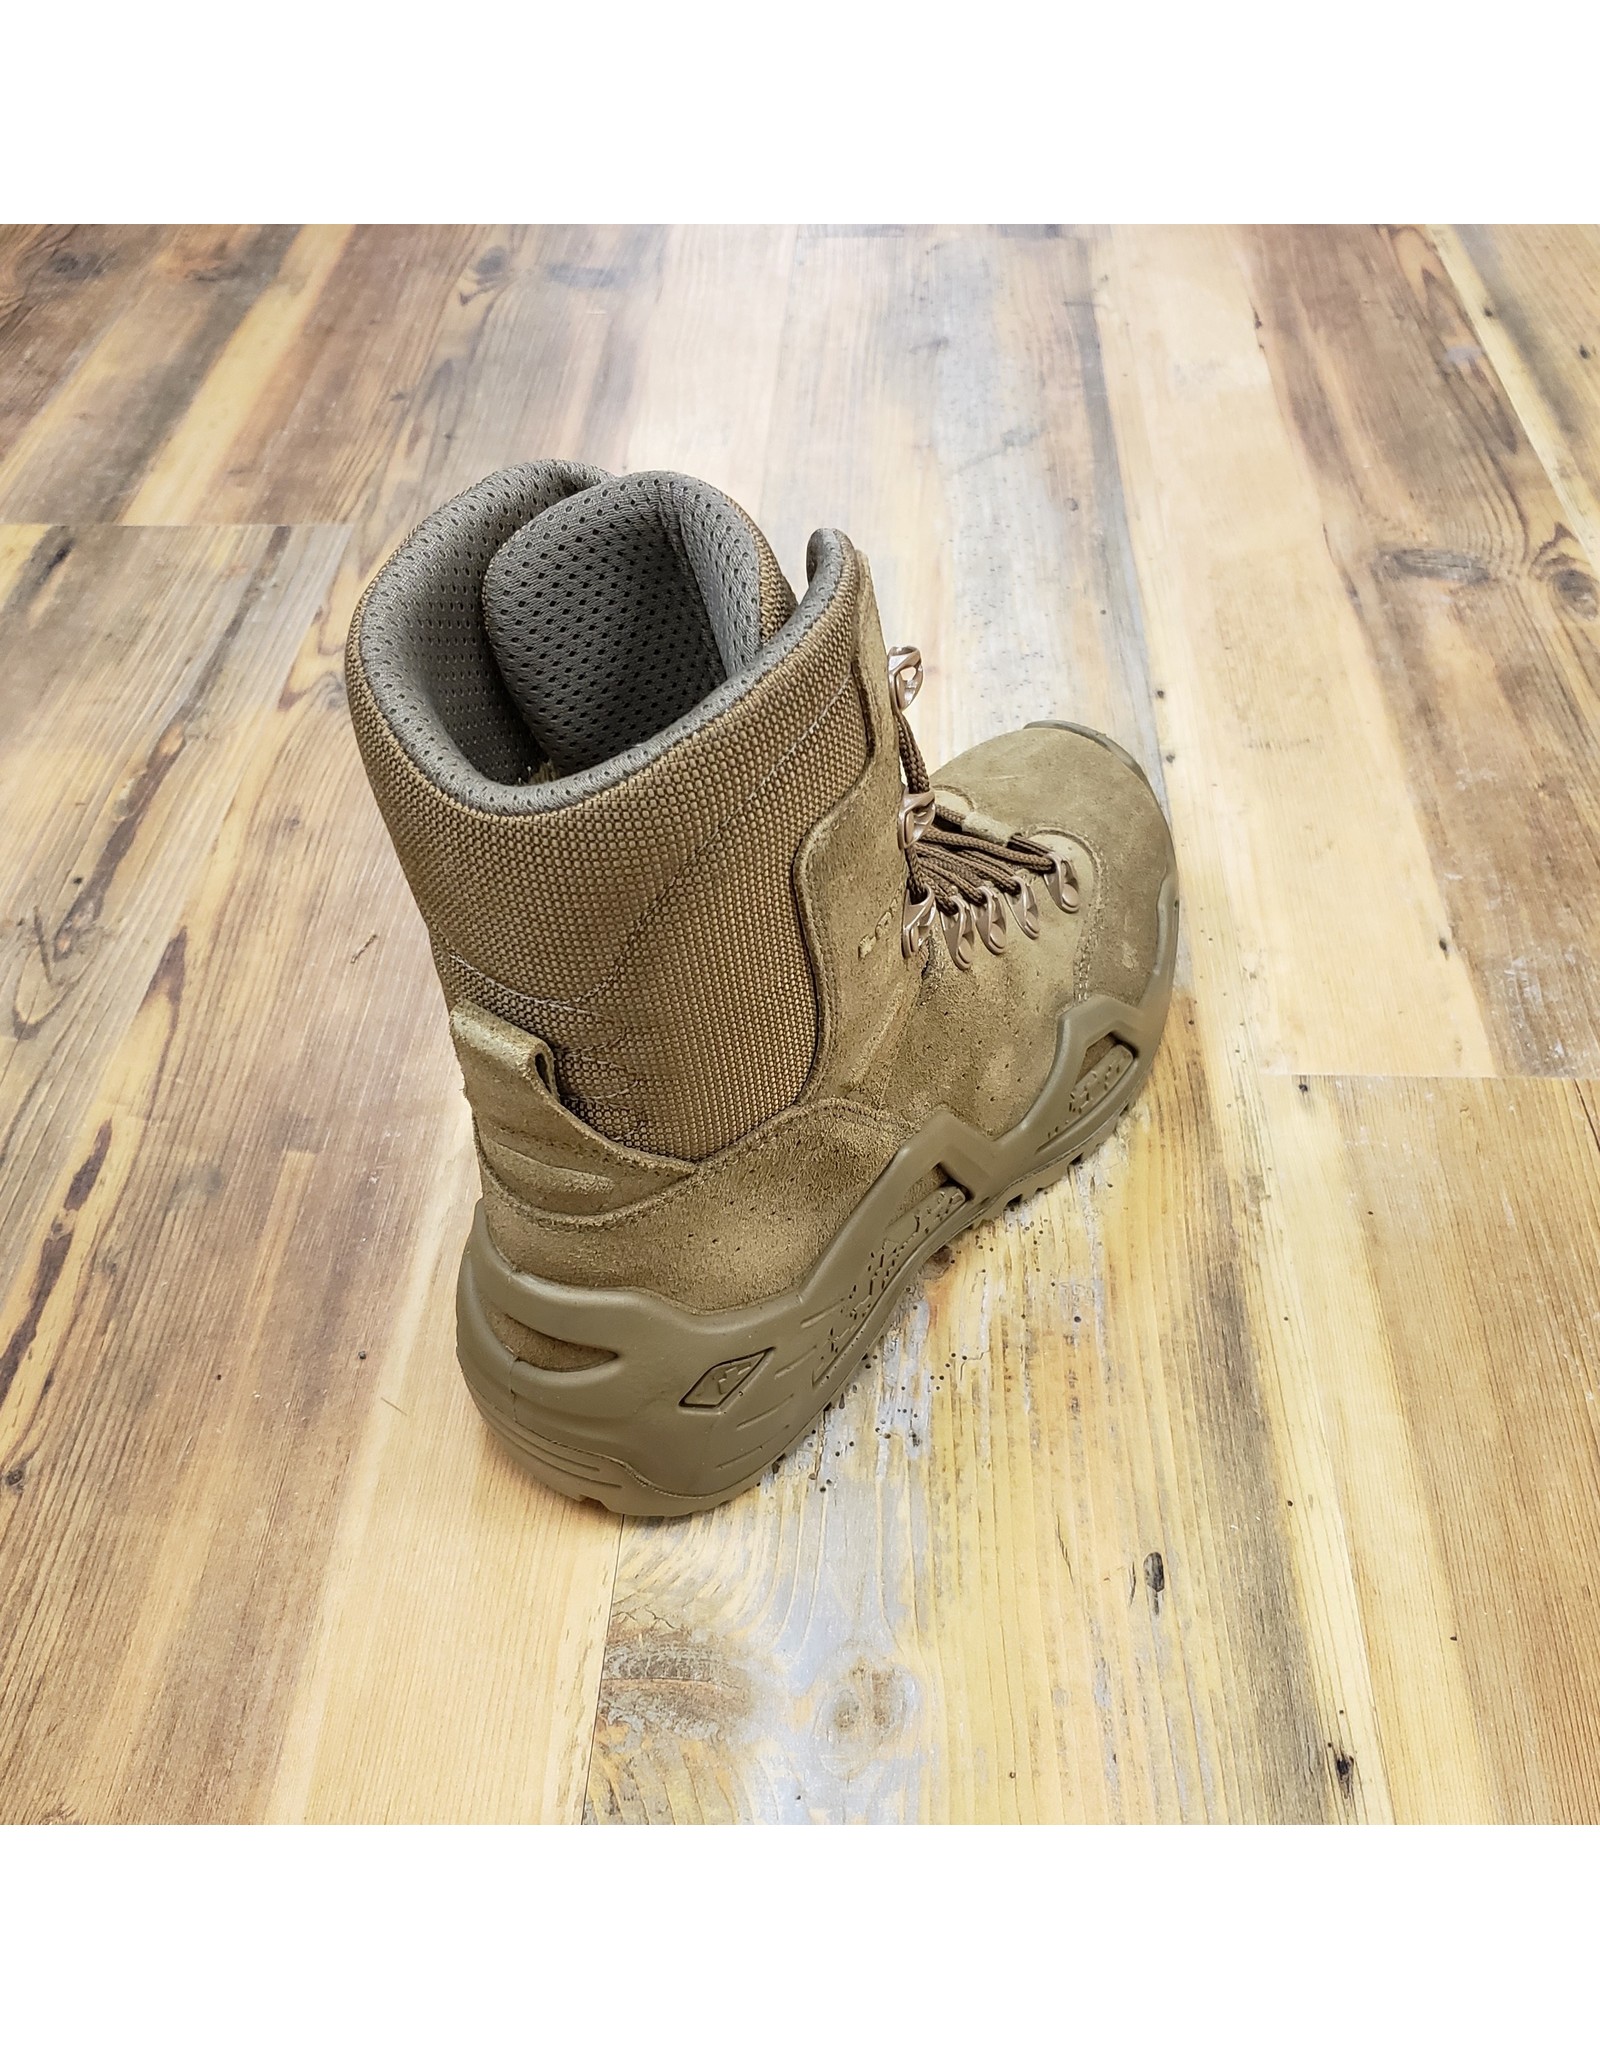 LOWA Z-8S WS C COYOTE TACTICAL BOOT